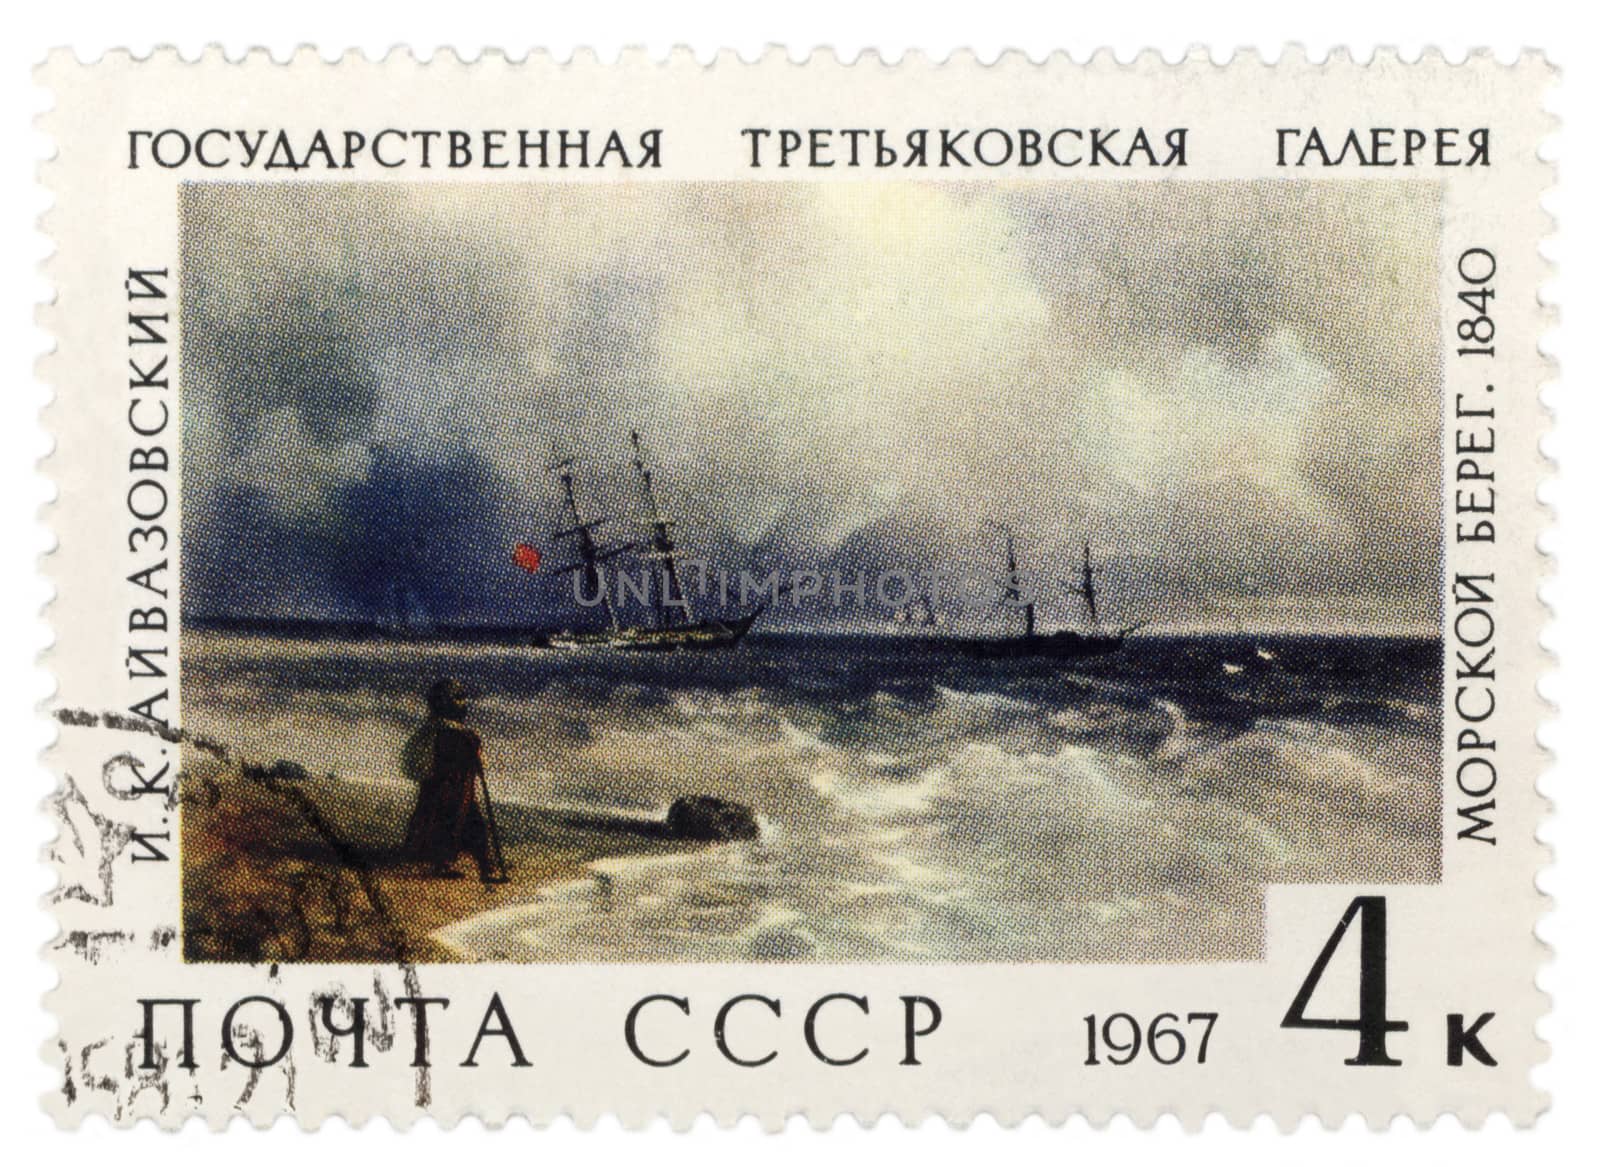 USSR - CIRCA 1967: A stamp printed in the USSR shows a painting by russian artist Aivazovsky "Seashore", series, circa 1967